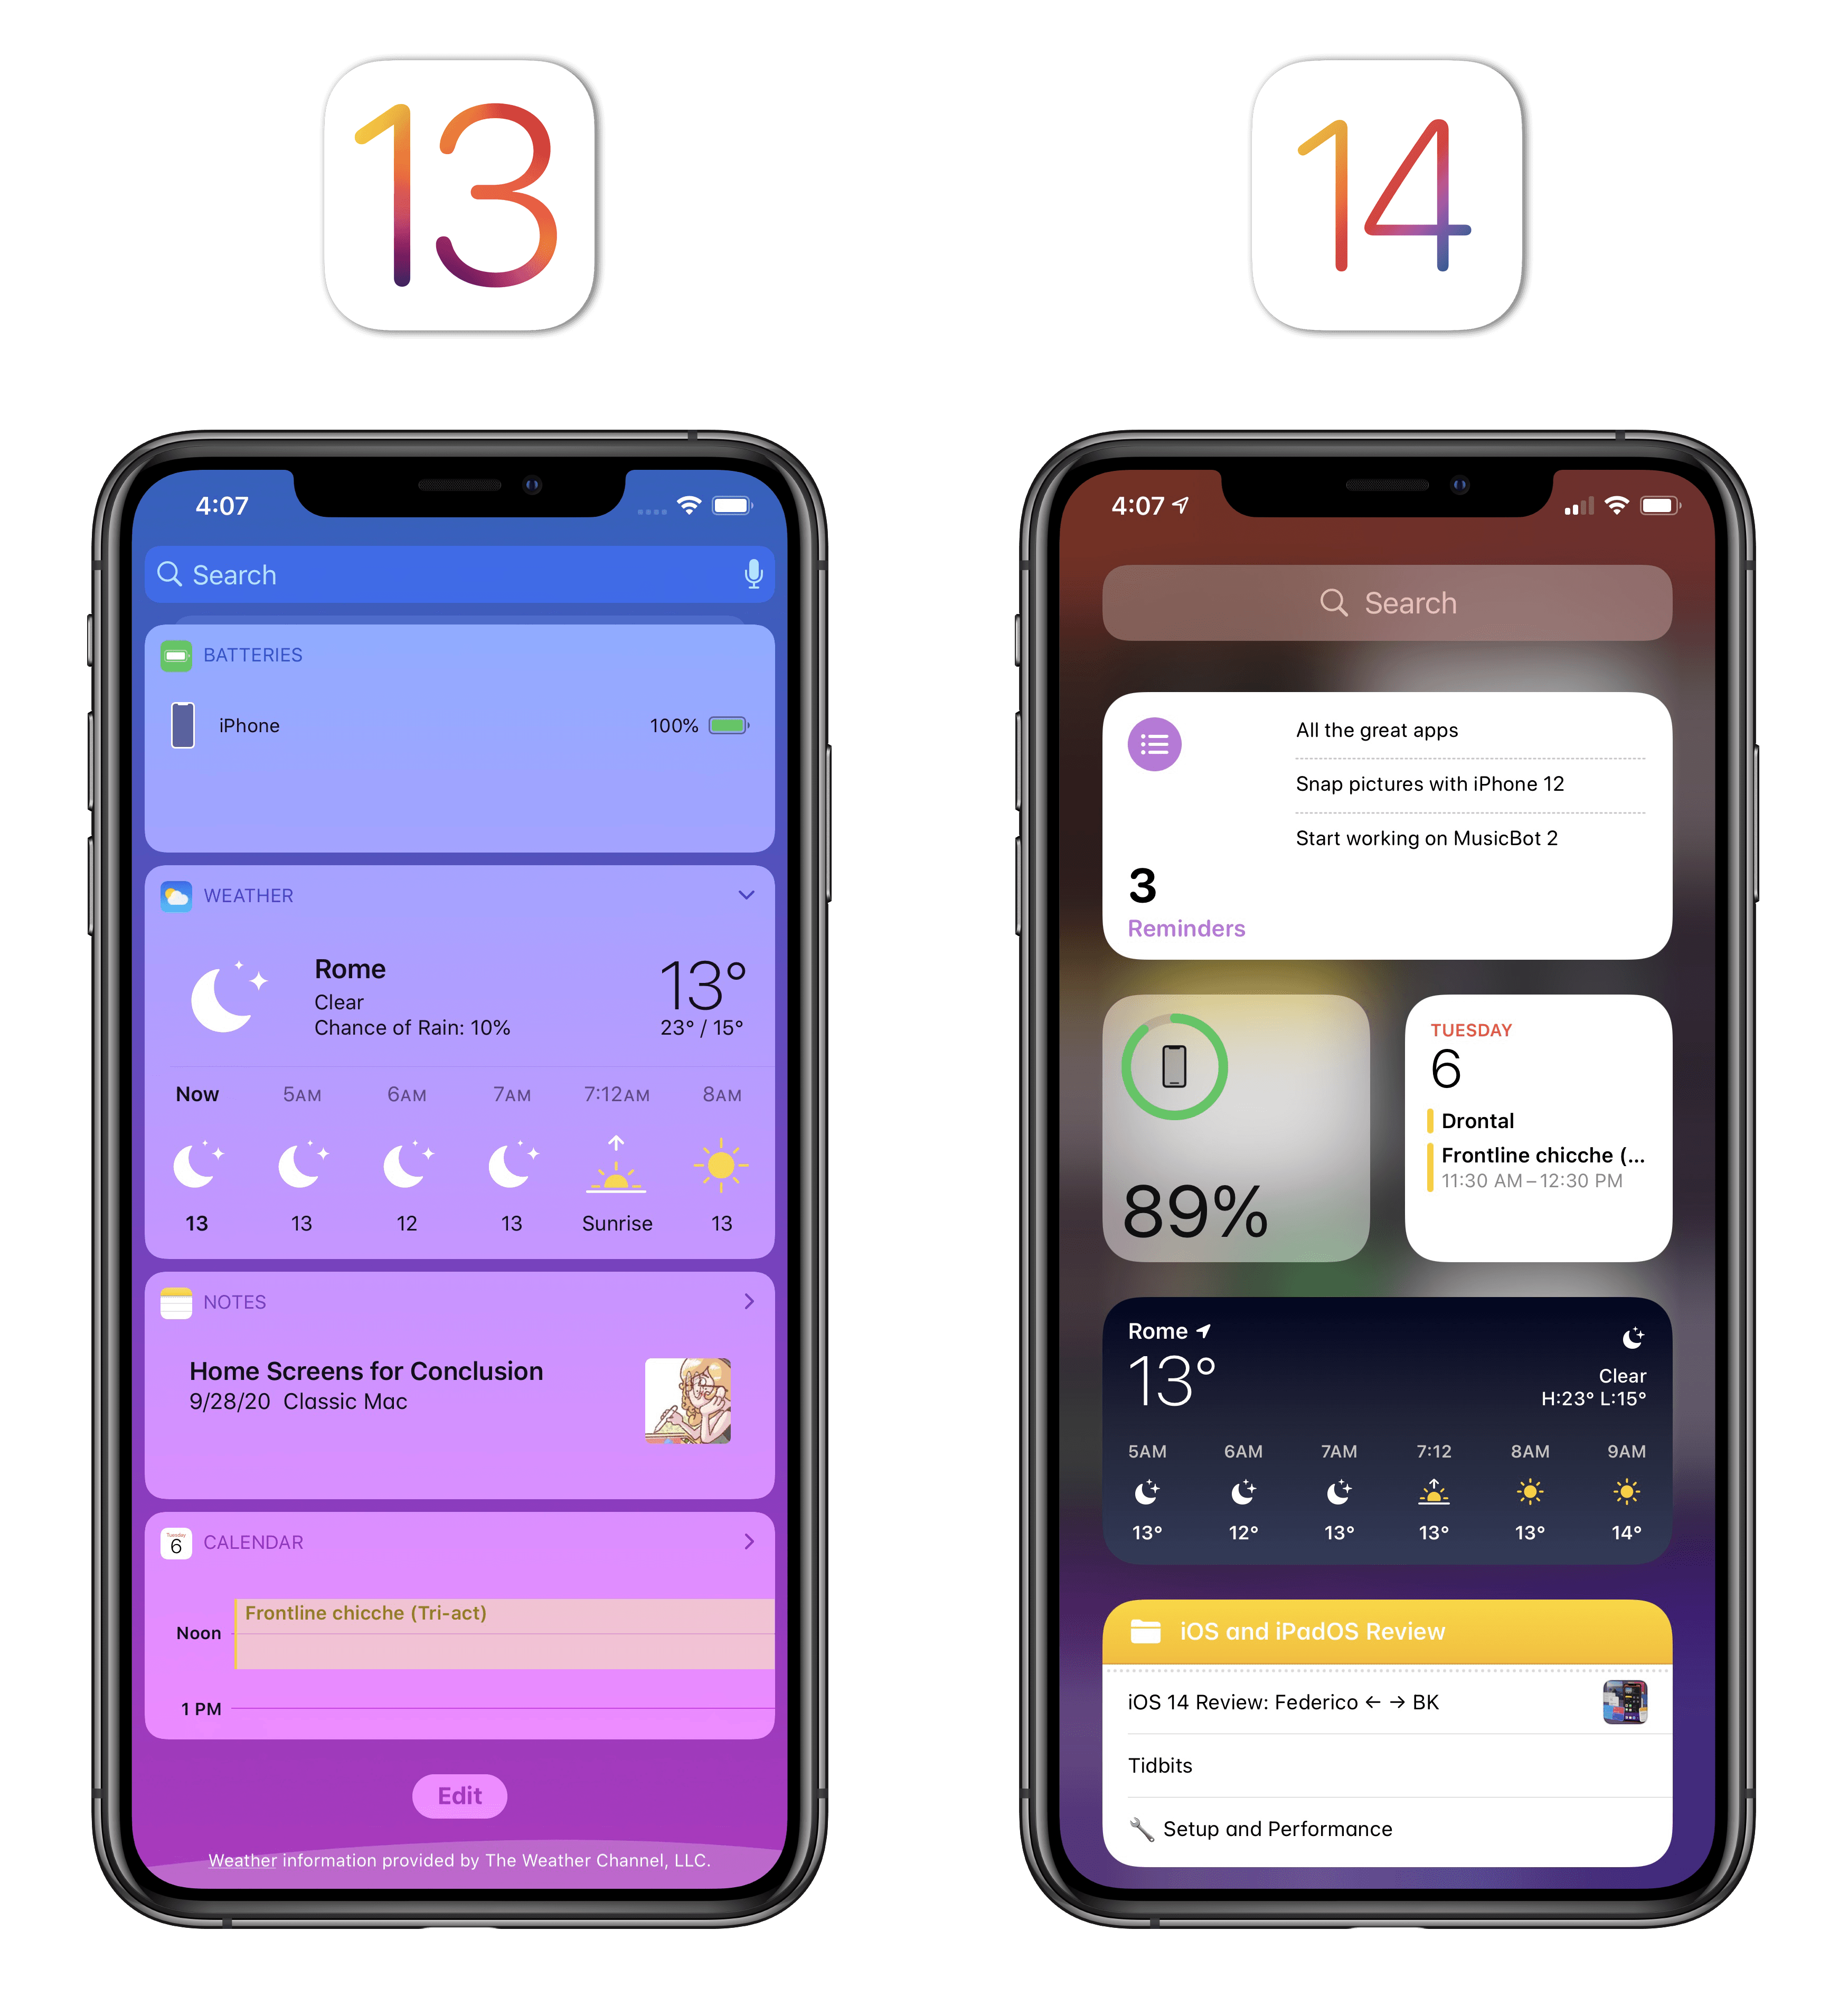 The difference between widgets in iOS 13 and 14 is striking.